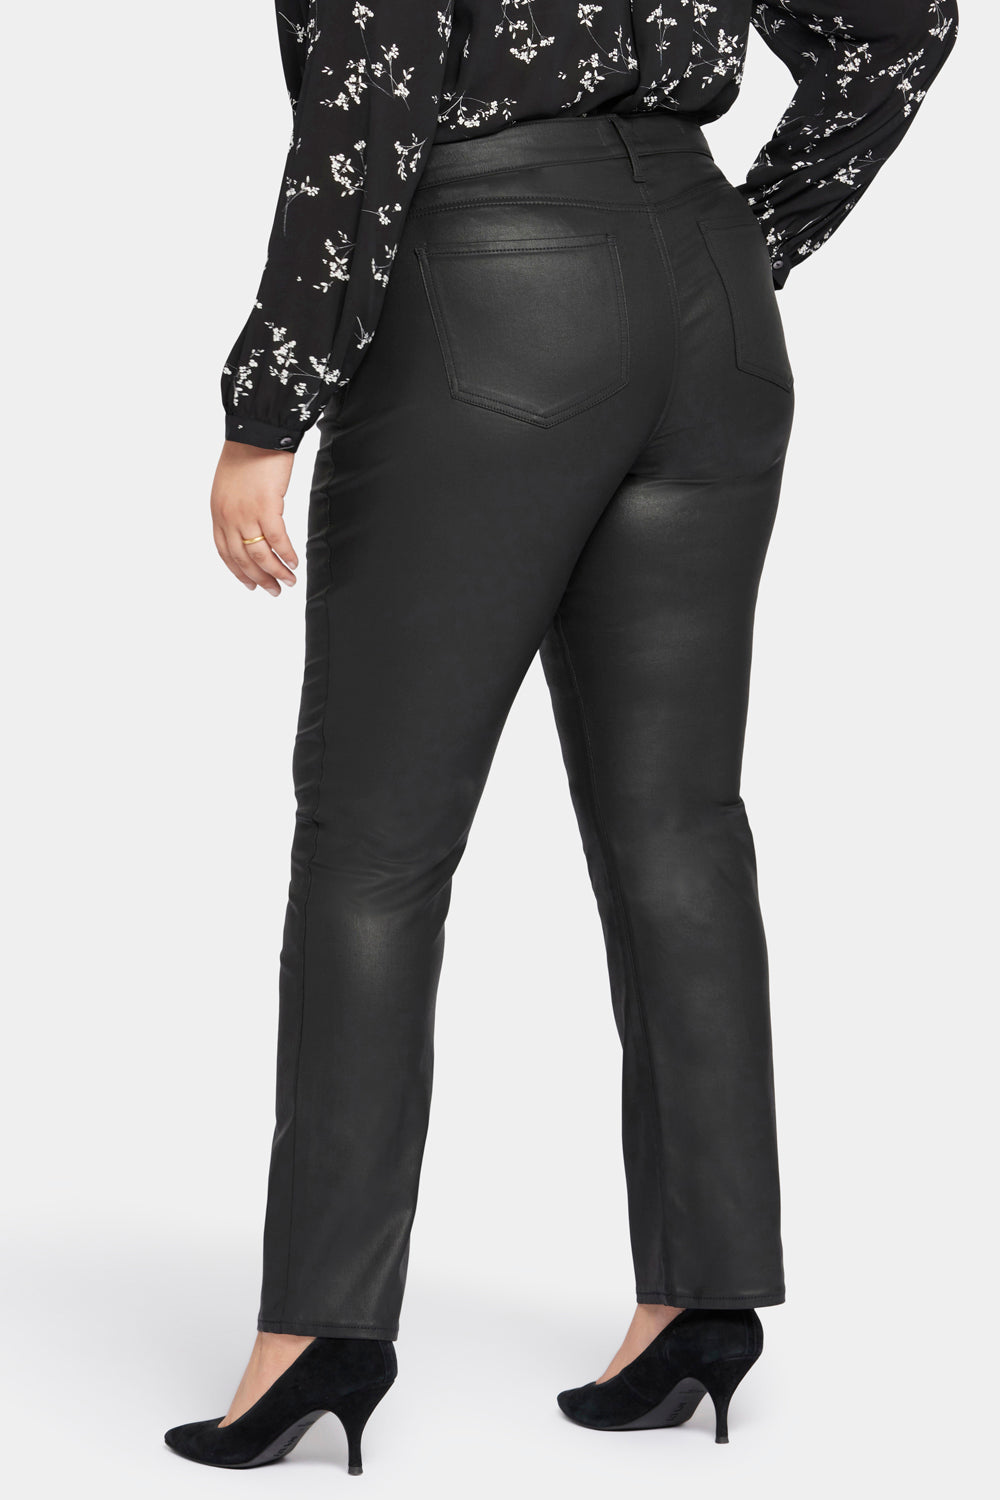 NYDJ Coated Marilyn Straight Jeans In Plus Size  - Black Coated